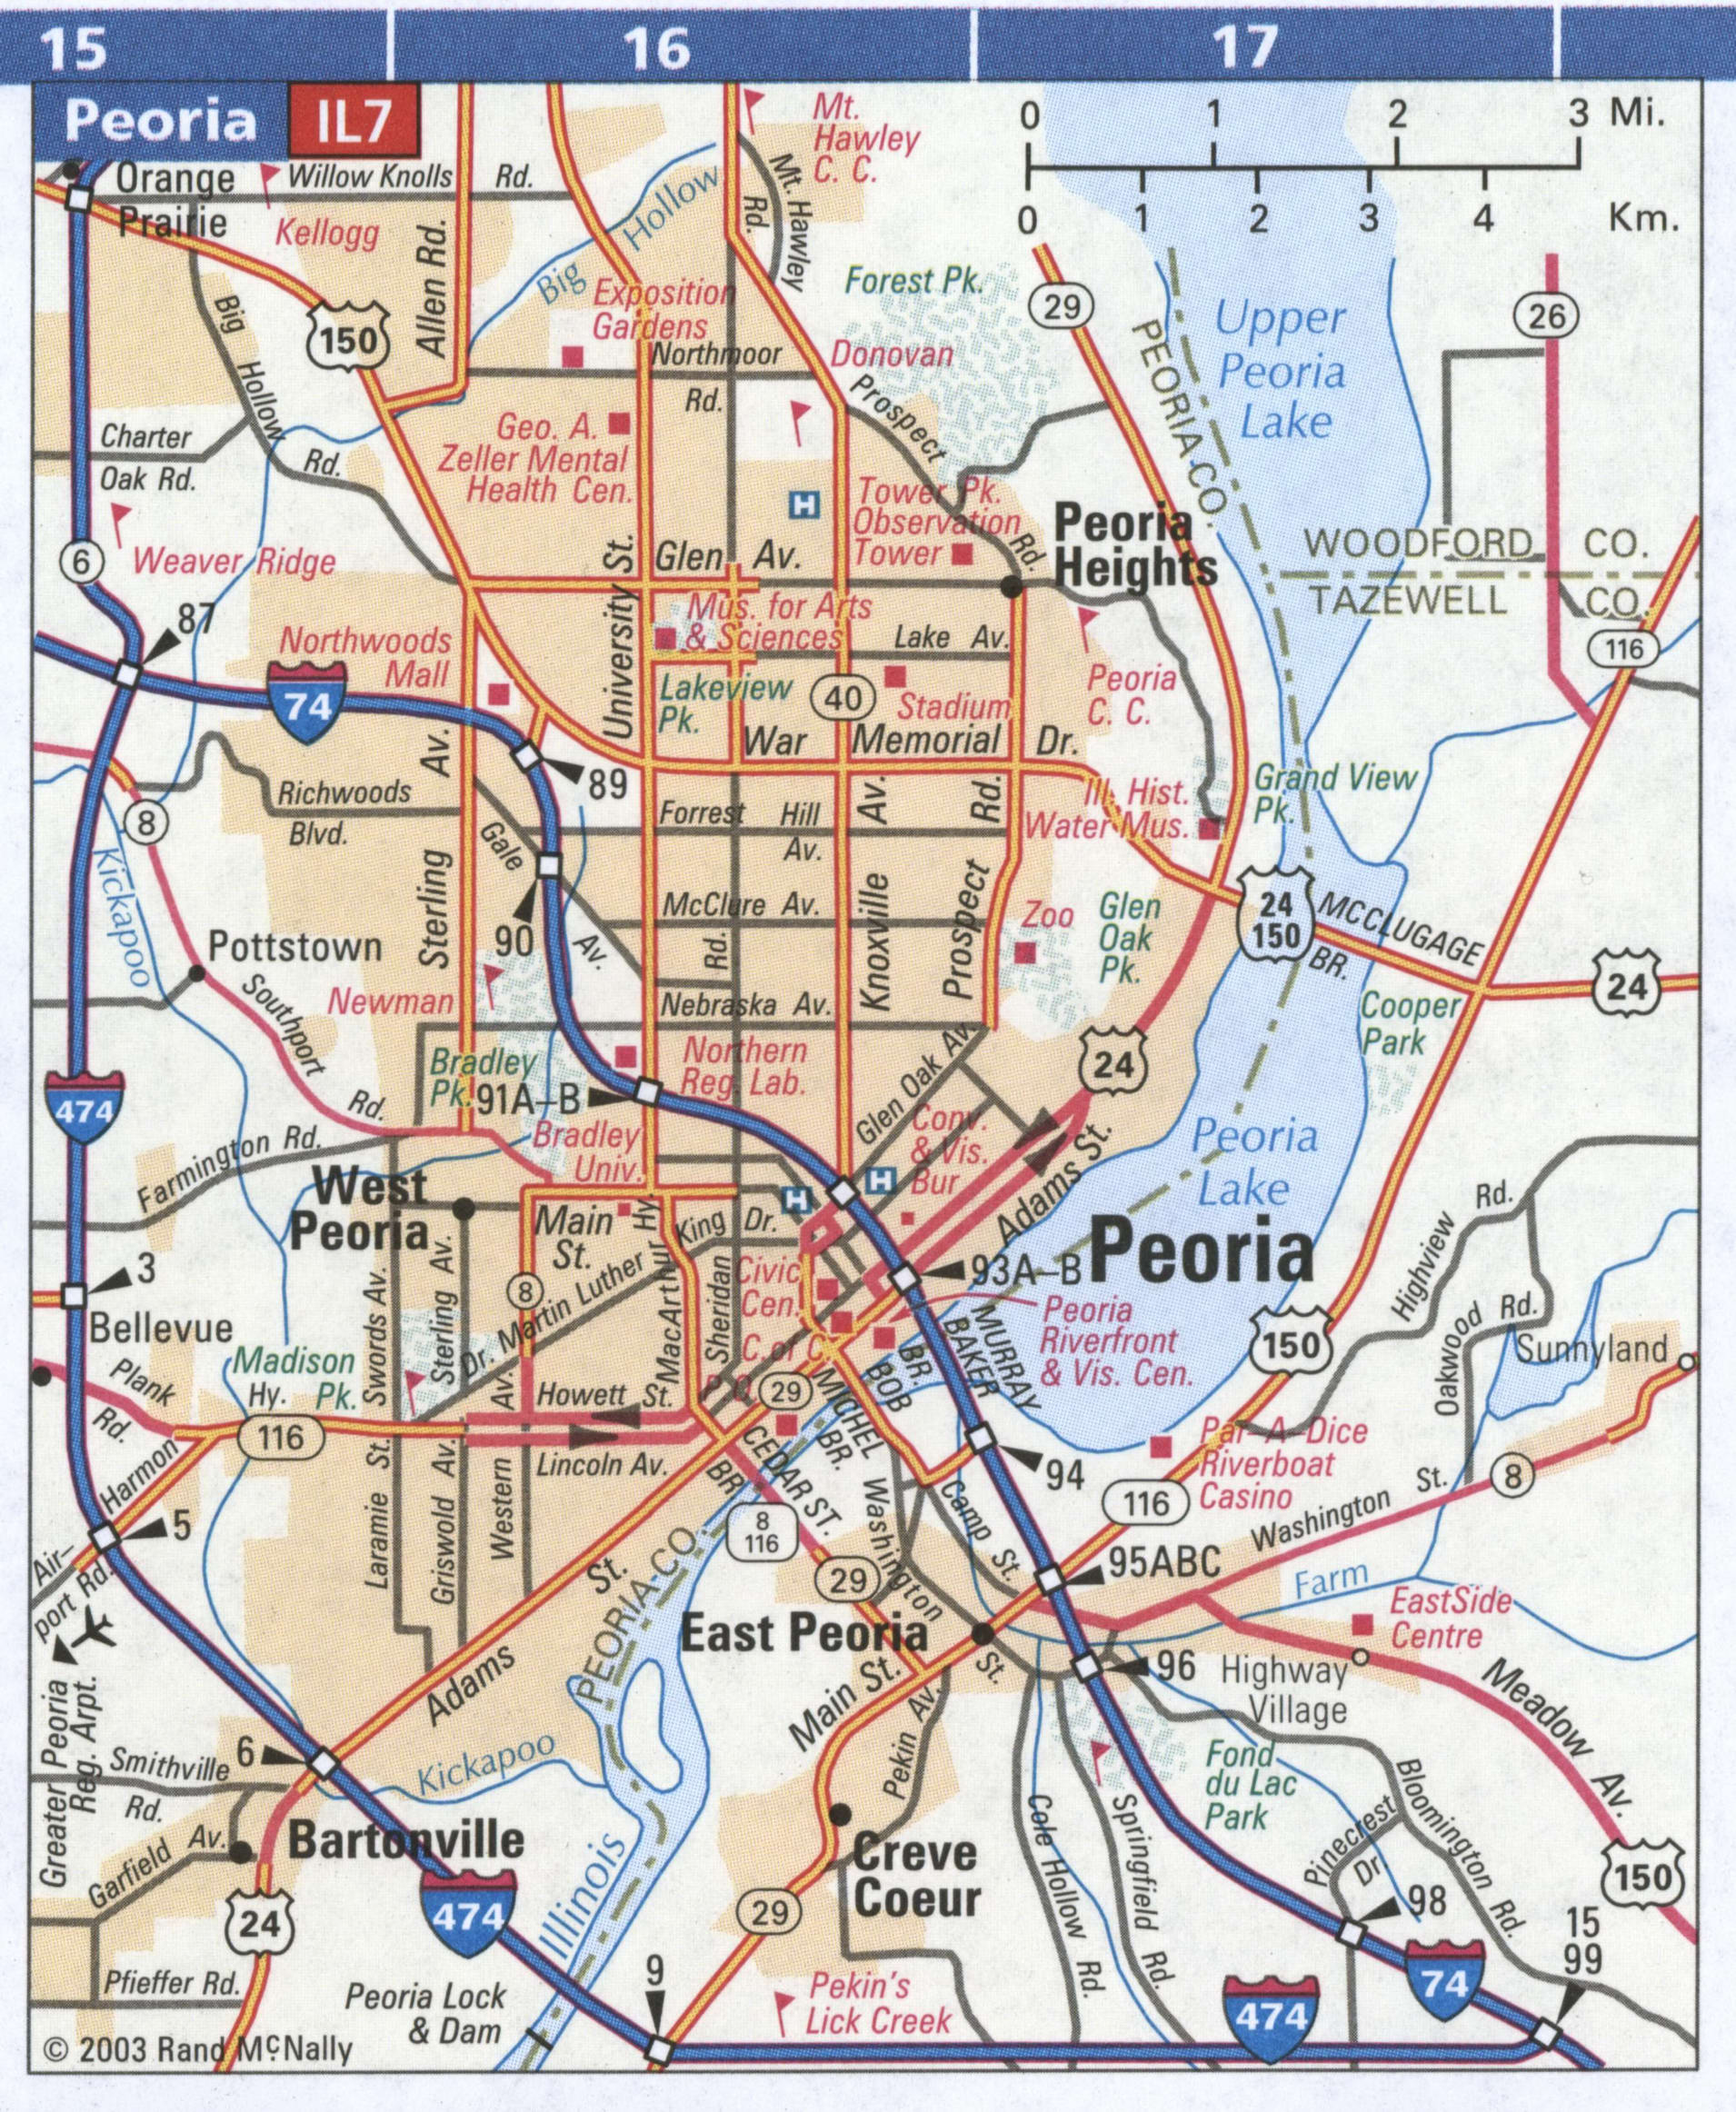 Peoria IL road map highway Peoria IL city and surrounding area